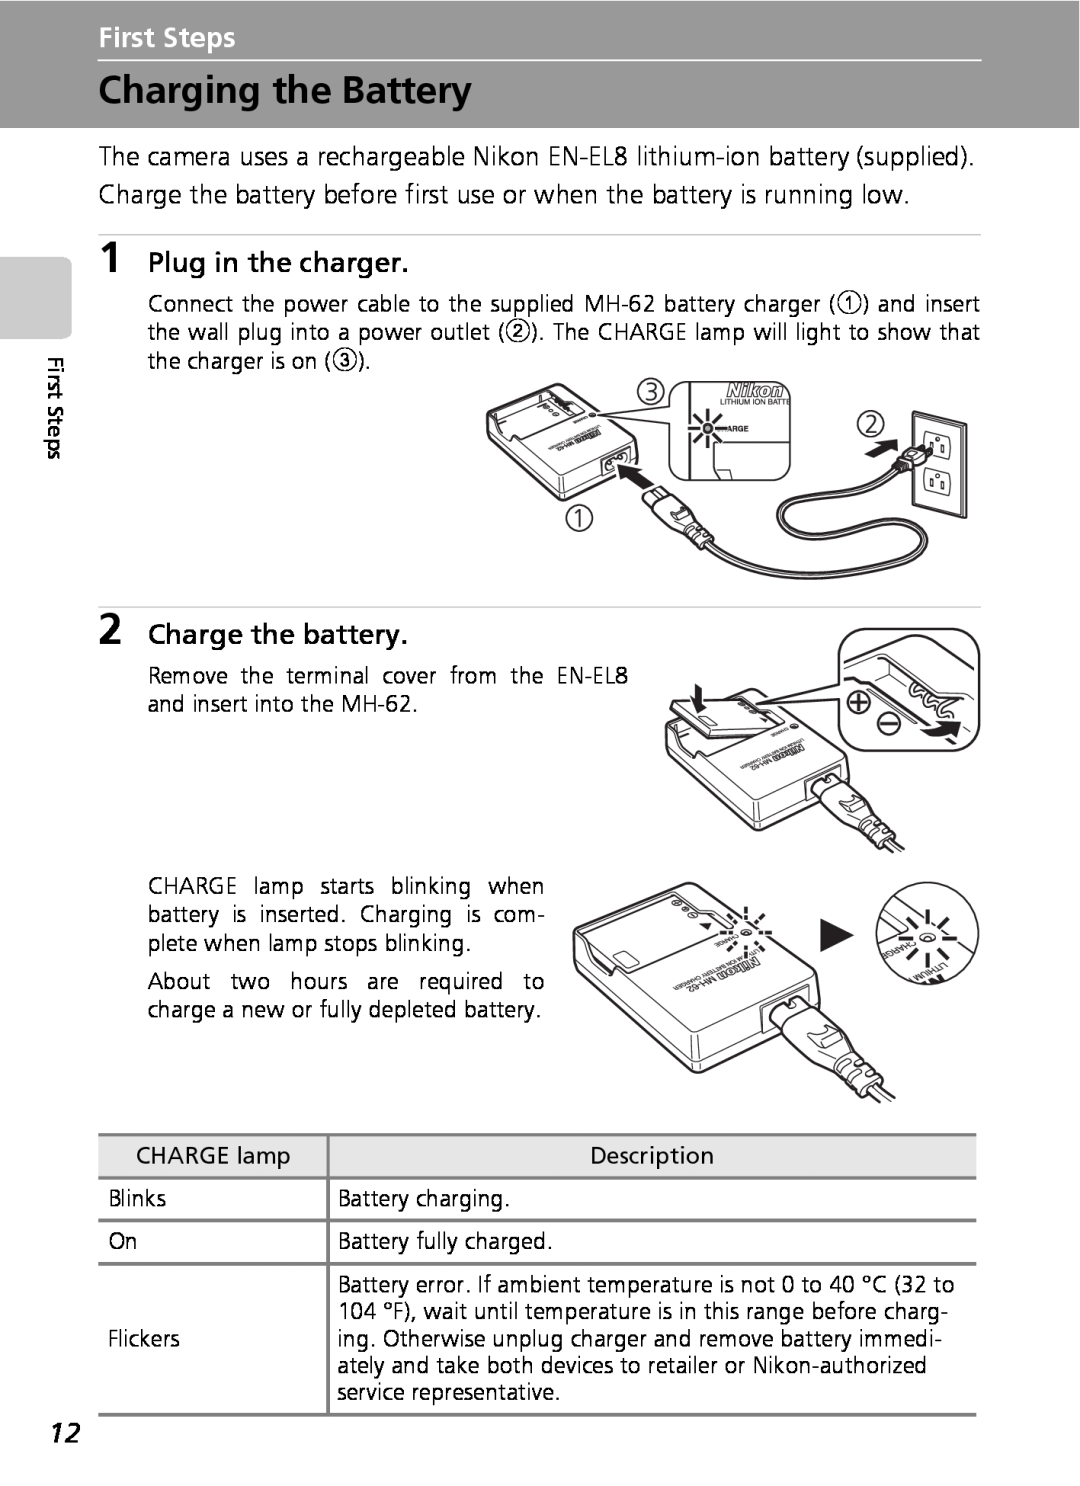 Nikon COOLPIXS9 manual Charging the Battery, First Steps, Plug in the charger, Charge the battery 